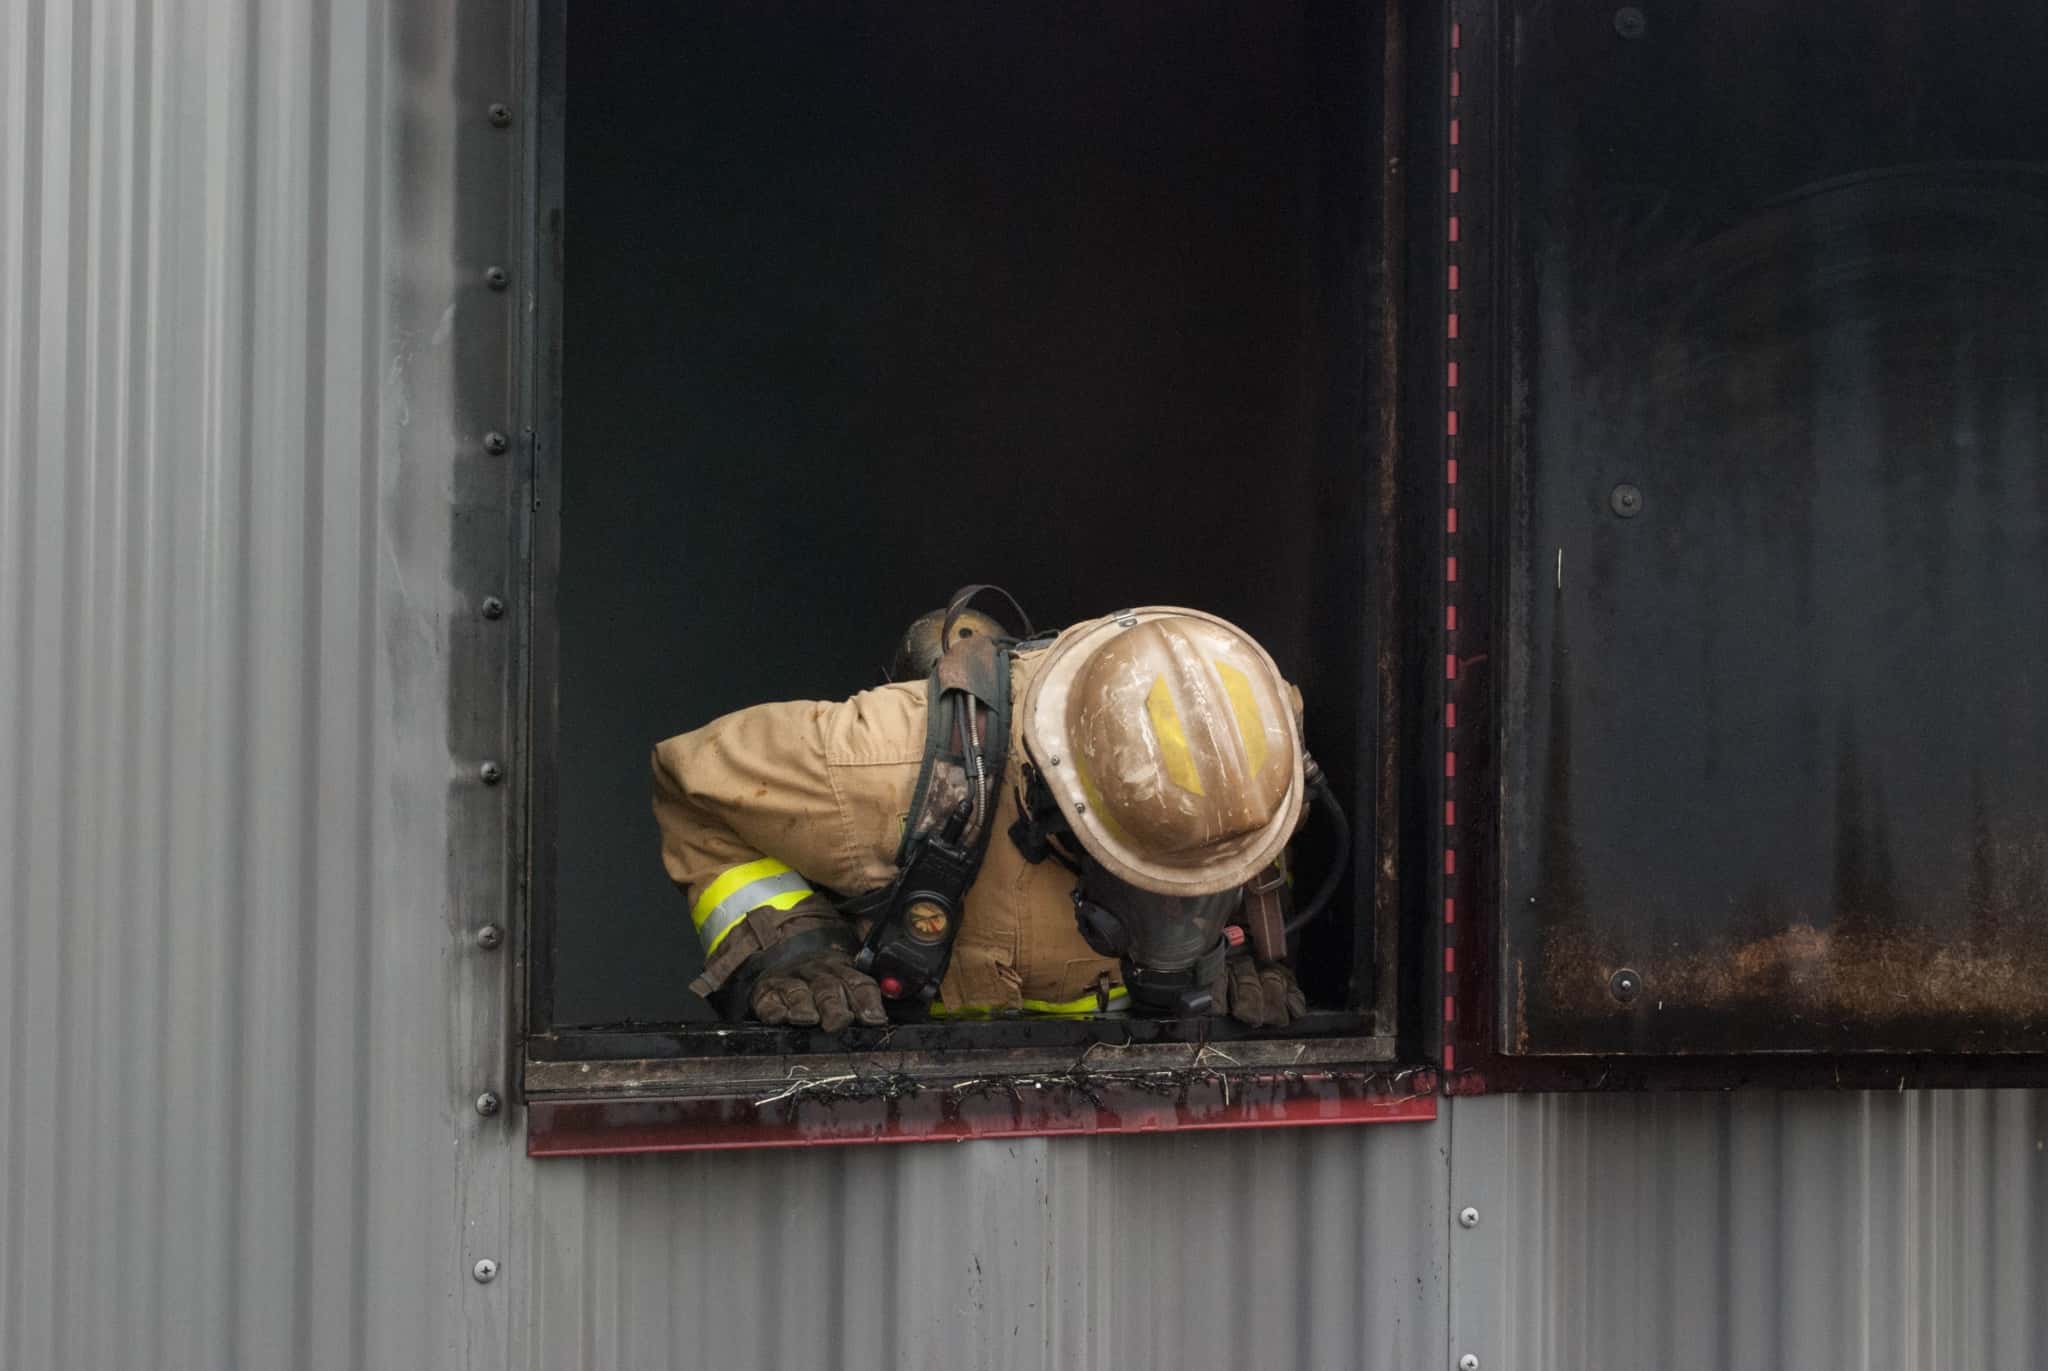 Firefighter looks down out of a charred window.